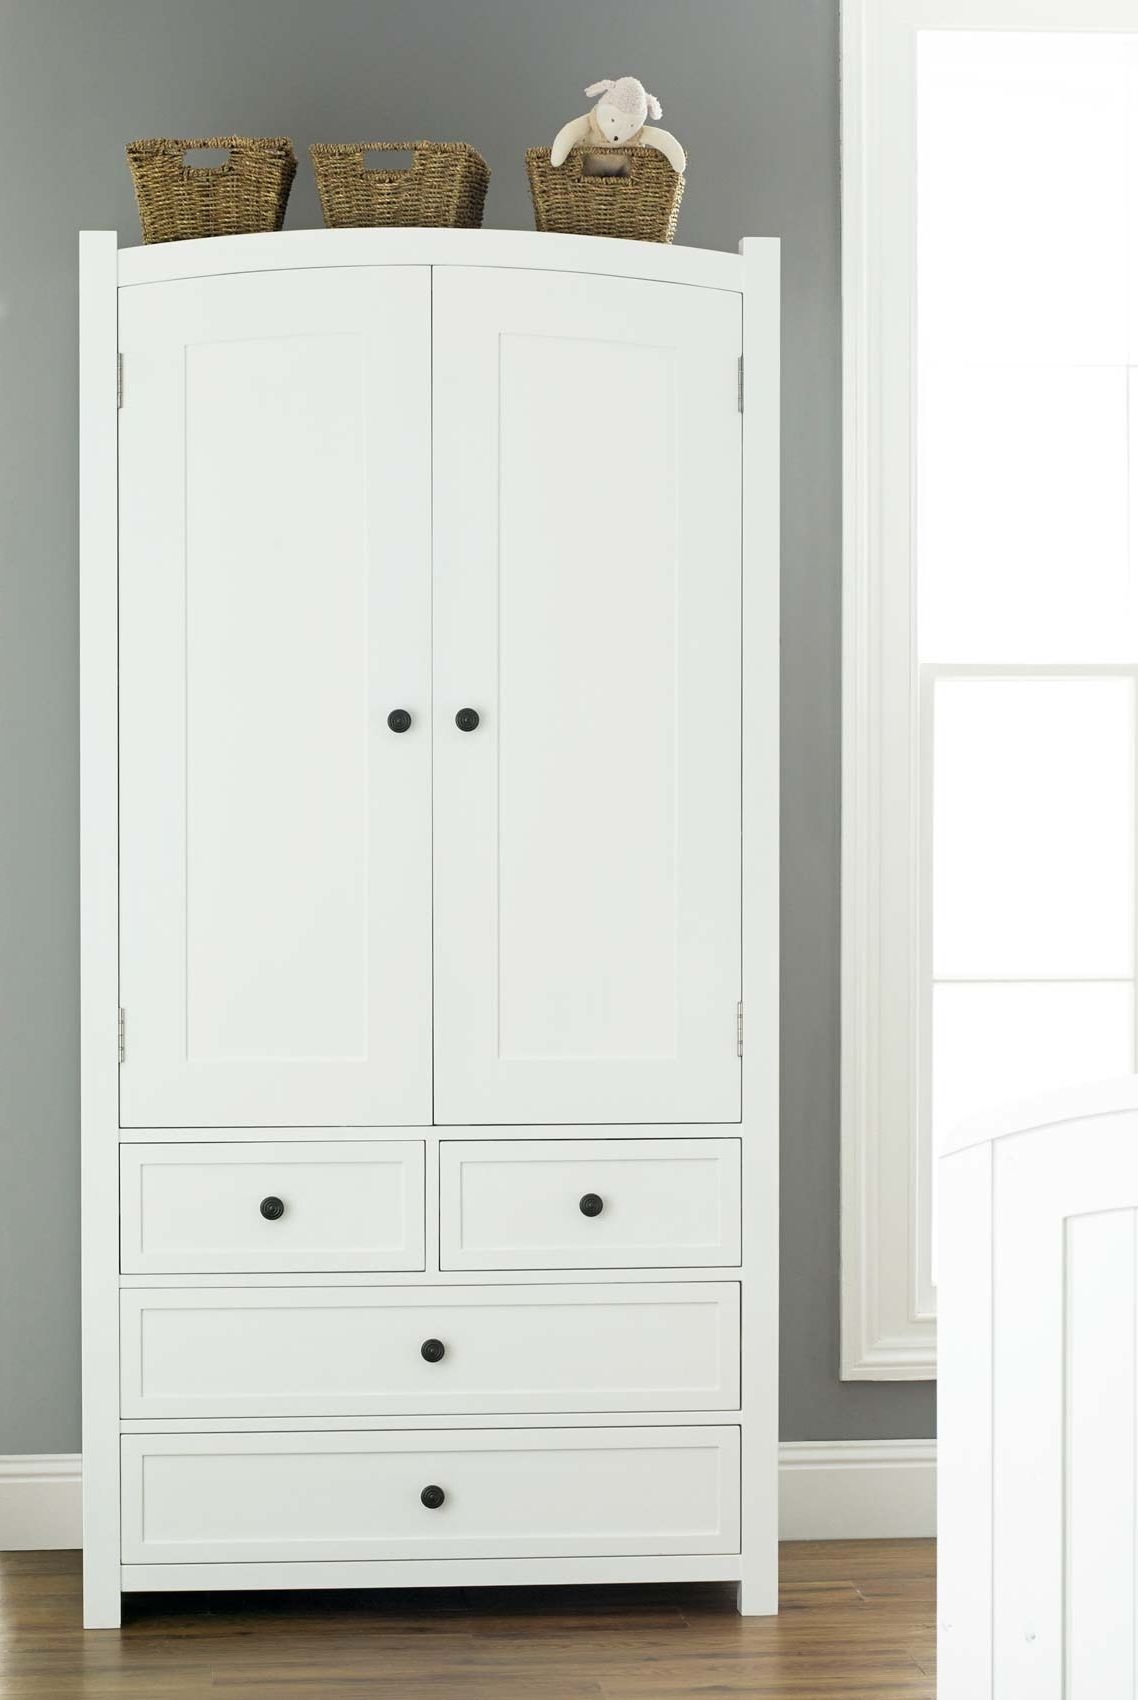 Most Recently Released White Wood Wardrobe With Drawers • Drawer Design With White Wood Wardrobes With Drawers (View 1 of 15)